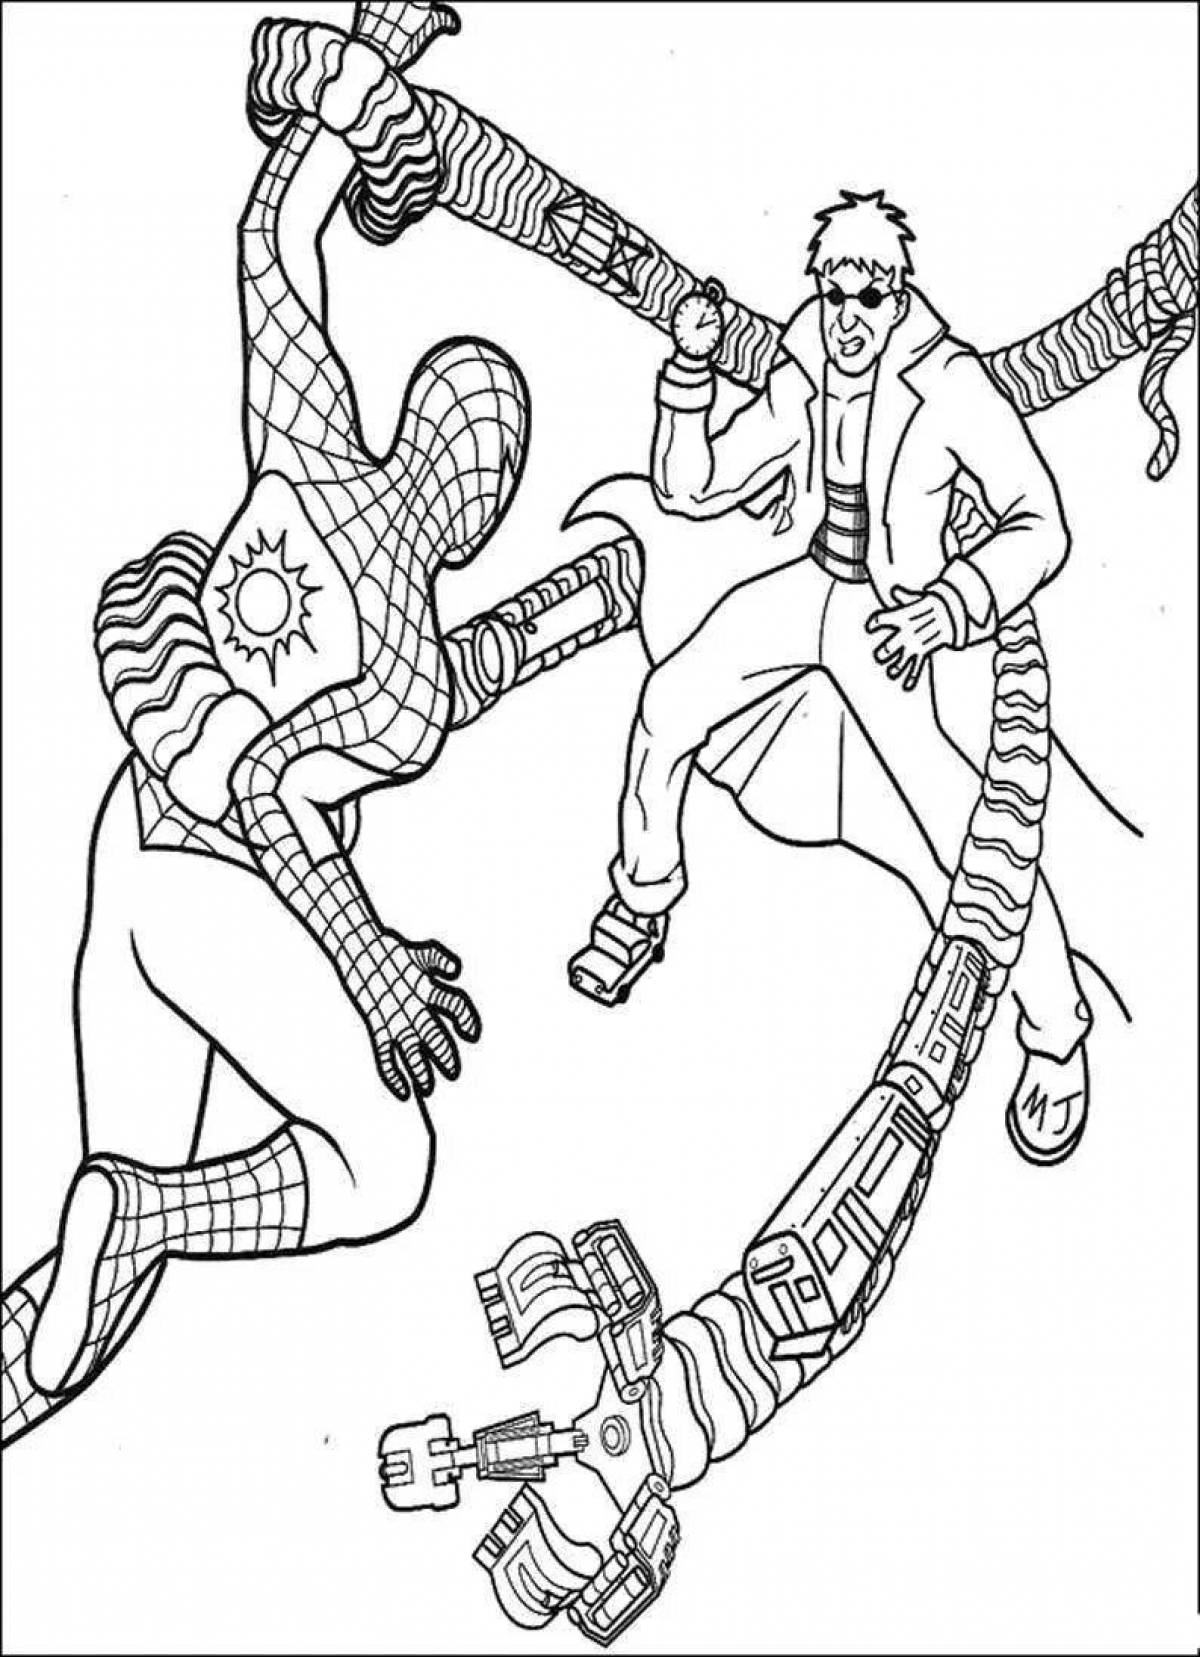 Coloring book cheerful doctor octopus